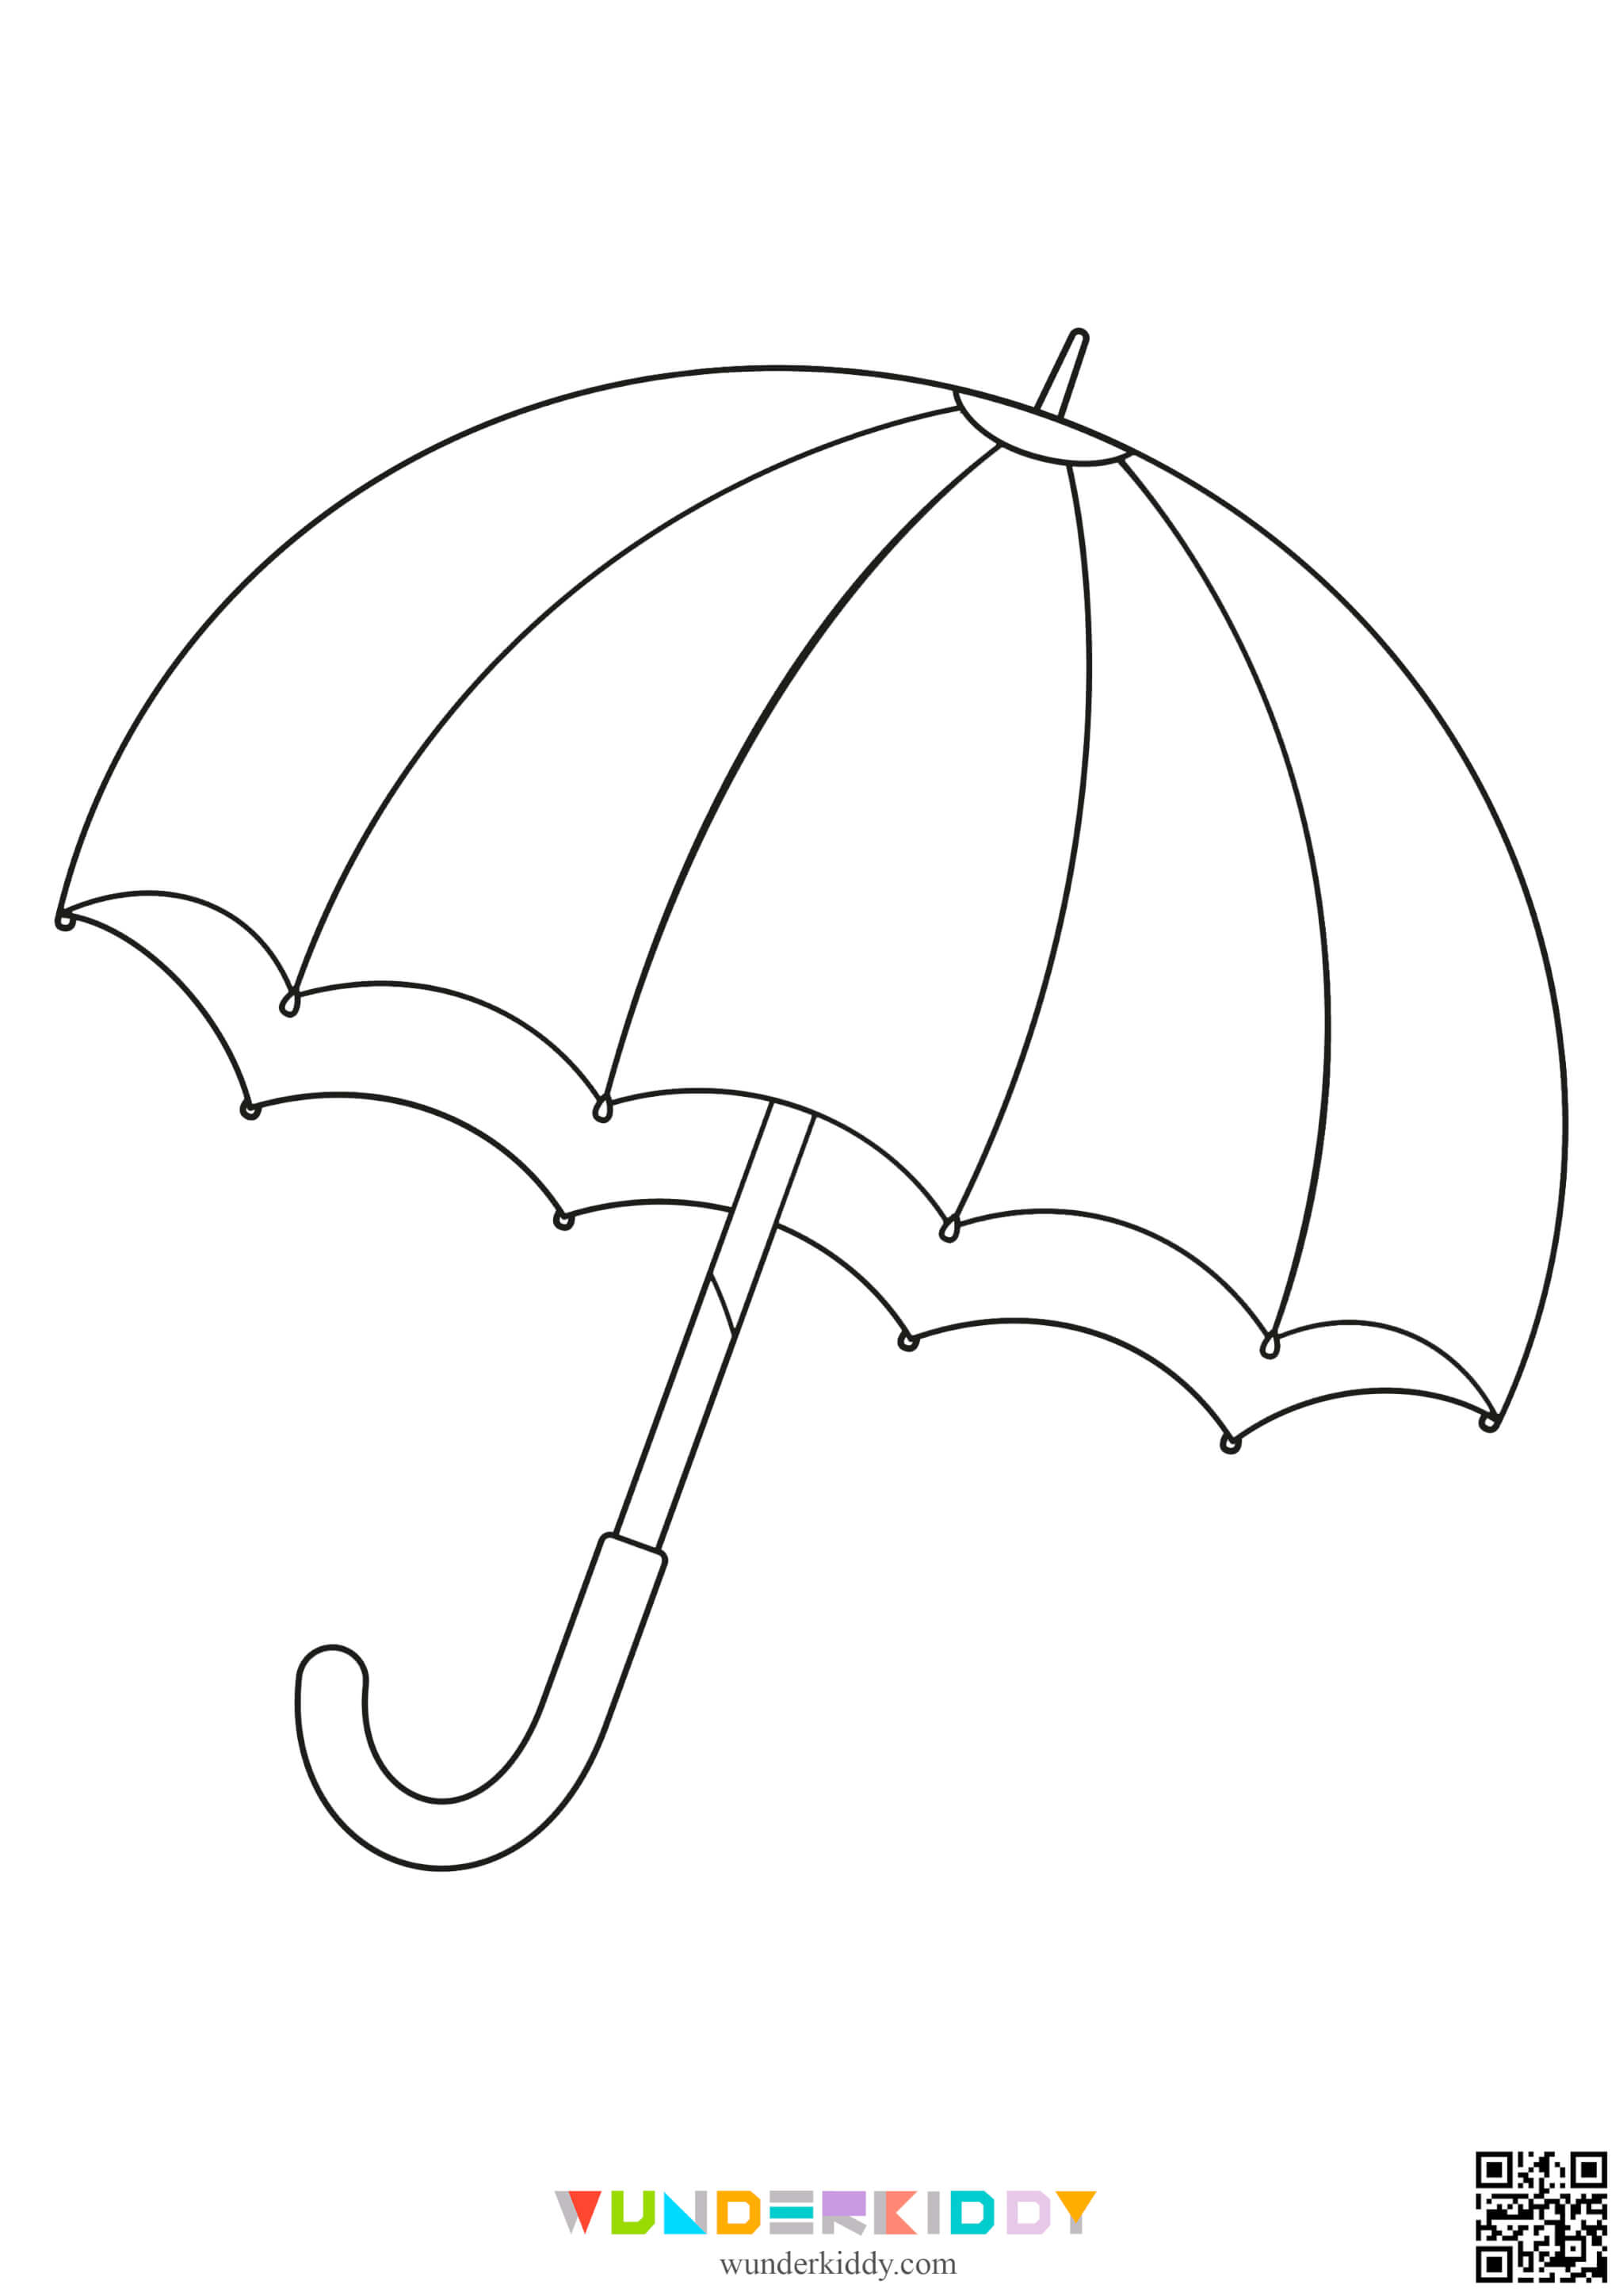 Umbrella Coloring Pages for Kids - Image 10